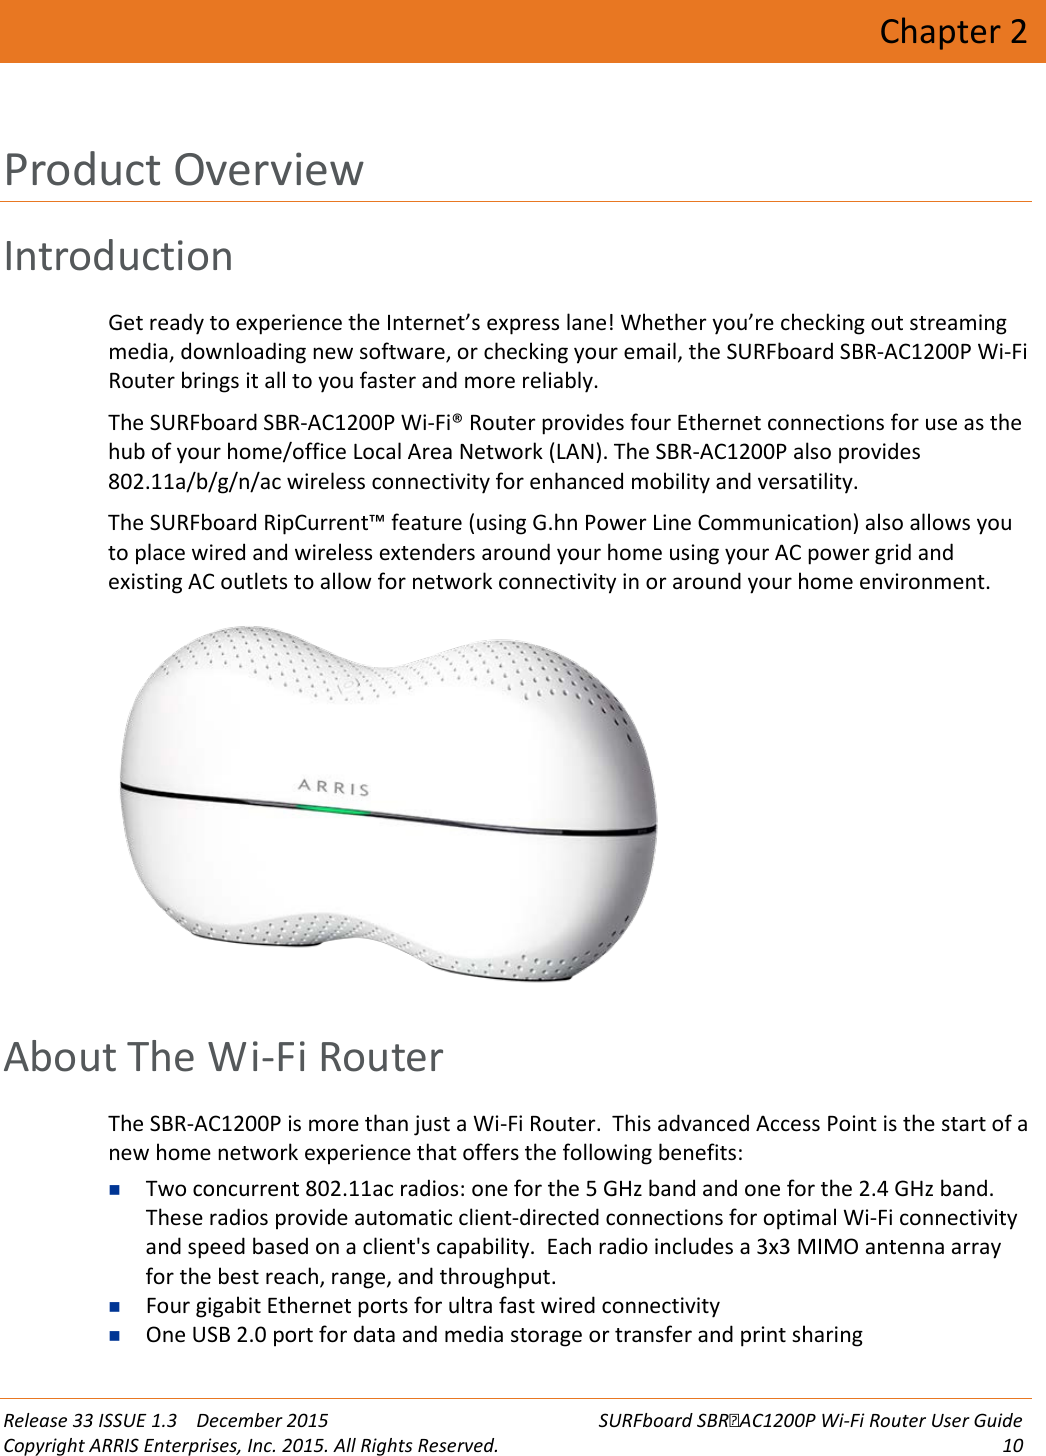  Release 33 ISSUE 1.3    December 2015 SURFboard SBRAC1200P Wi-Fi Router User Guide Copyright ARRIS Enterprises, Inc. 2015. All Rights Reserved. 10  Chapter 2 Product Overview Introduction Get ready to experience the Internet’s express lane! Whether you’re checking out streaming media, downloading new software, or checking your email, the SURFboard SBR-AC1200P Wi-Fi Router brings it all to you faster and more reliably.  The SURFboard SBR-AC1200P Wi-Fi® Router provides four Ethernet connections for use as the hub of your home/office Local Area Network (LAN). The SBR-AC1200P also provides 802.11a/b/g/n/ac wireless connectivity for enhanced mobility and versatility.  The SURFboard RipCurrent™ feature (using G.hn Power Line Communication) also allows you to place wired and wireless extenders around your home using your AC power grid and existing AC outlets to allow for network connectivity in or around your home environment.    About The Wi-Fi Router The SBR-AC1200P is more than just a Wi-Fi Router.  This advanced Access Point is the start of a new home network experience that offers the following benefits:  Two concurrent 802.11ac radios: one for the 5 GHz band and one for the 2.4 GHz band.  These radios provide automatic client-directed connections for optimal Wi-Fi connectivity and speed based on a client&apos;s capability.  Each radio includes a 3x3 MIMO antenna array for the best reach, range, and throughput.  Four gigabit Ethernet ports for ultra fast wired connectivity    One USB 2.0 port for data and media storage or transfer and print sharing 